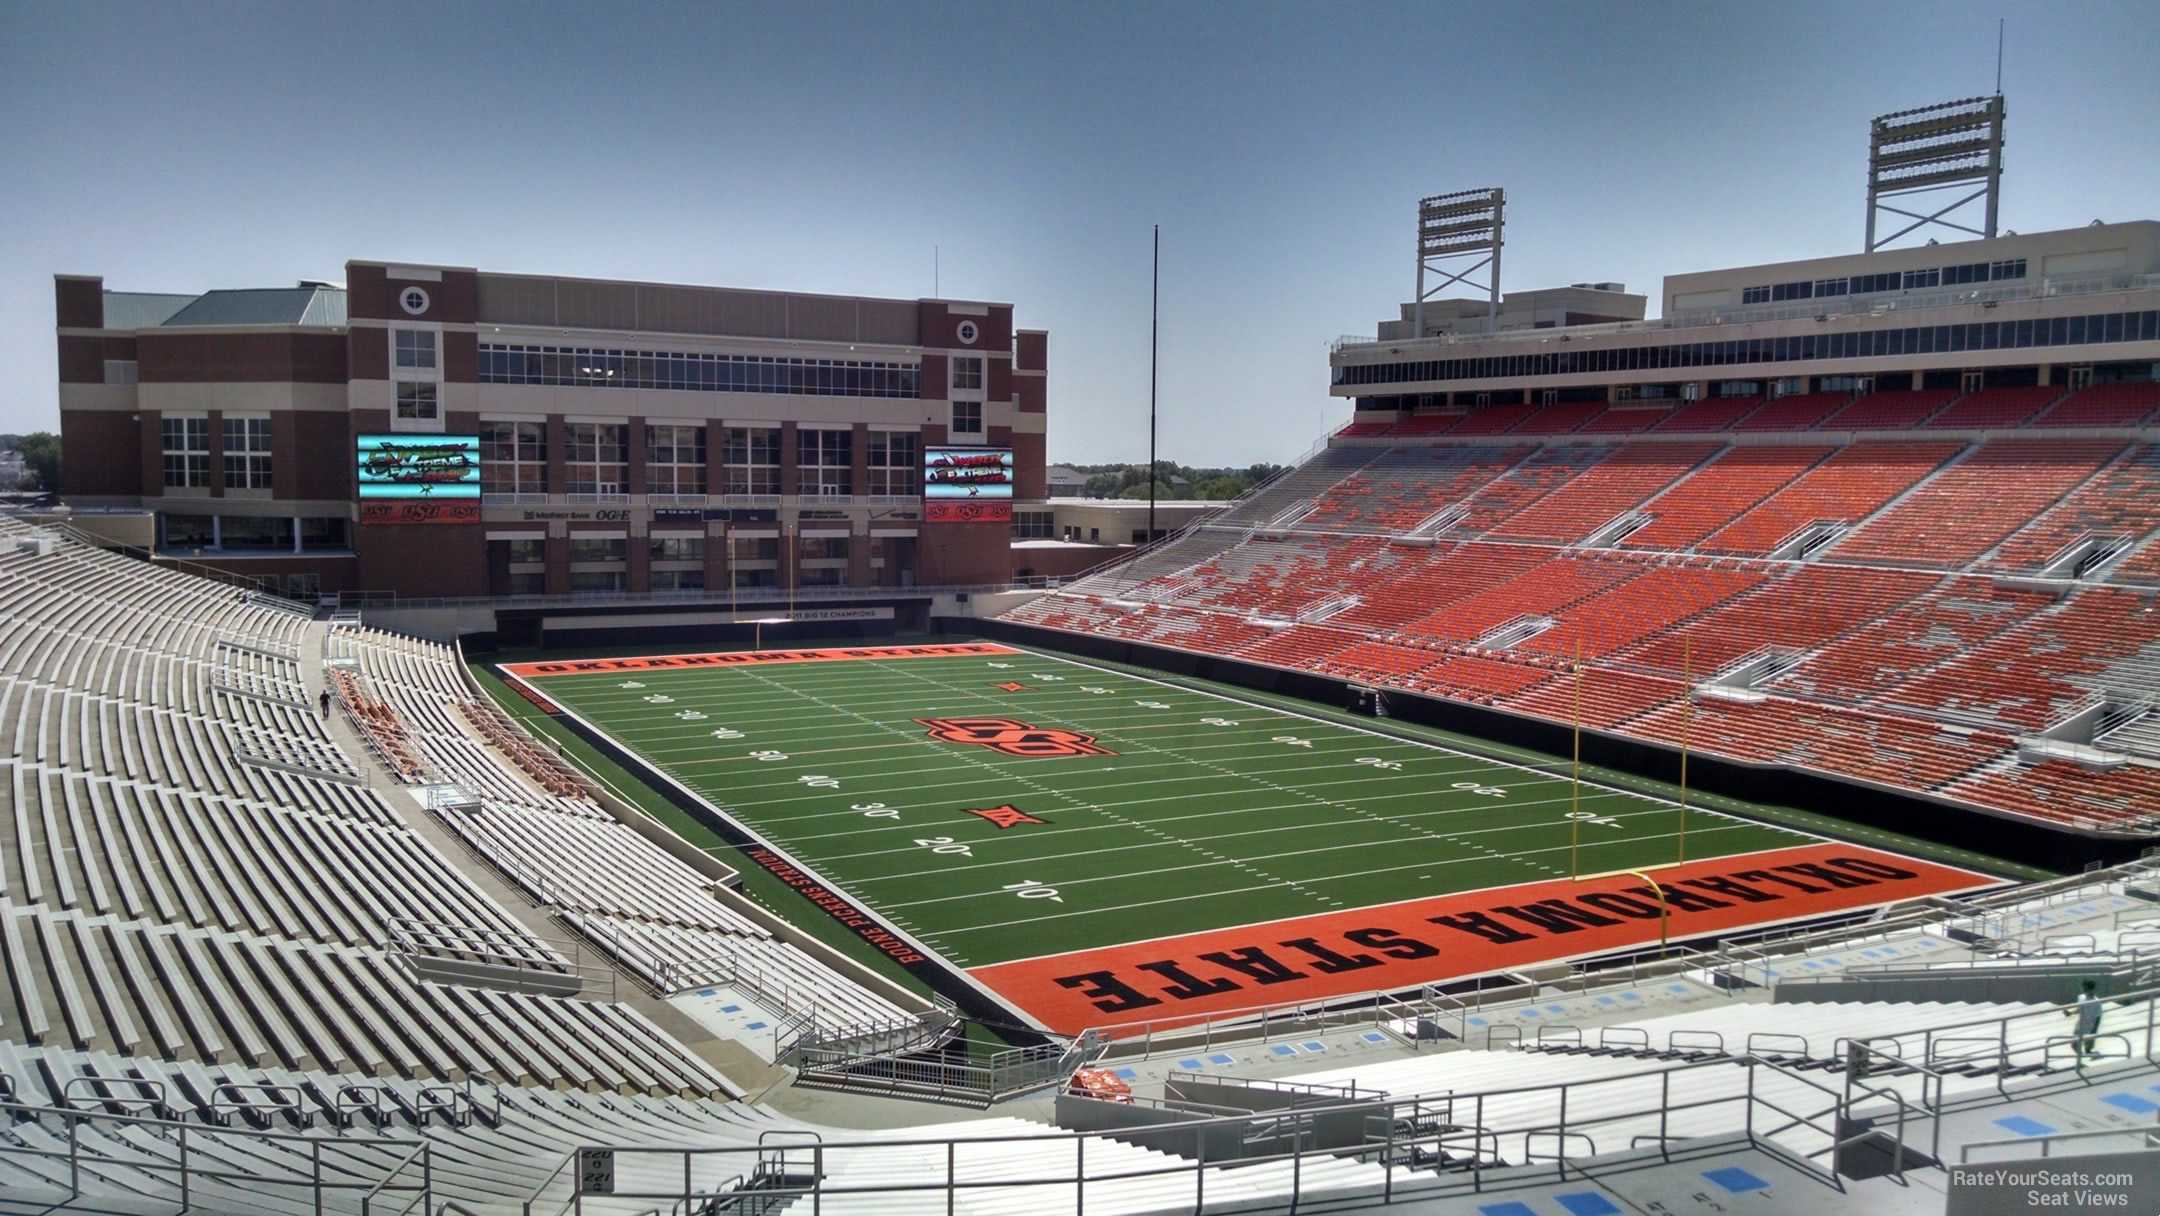 section 324, row 19 seat view  - boone pickens stadium